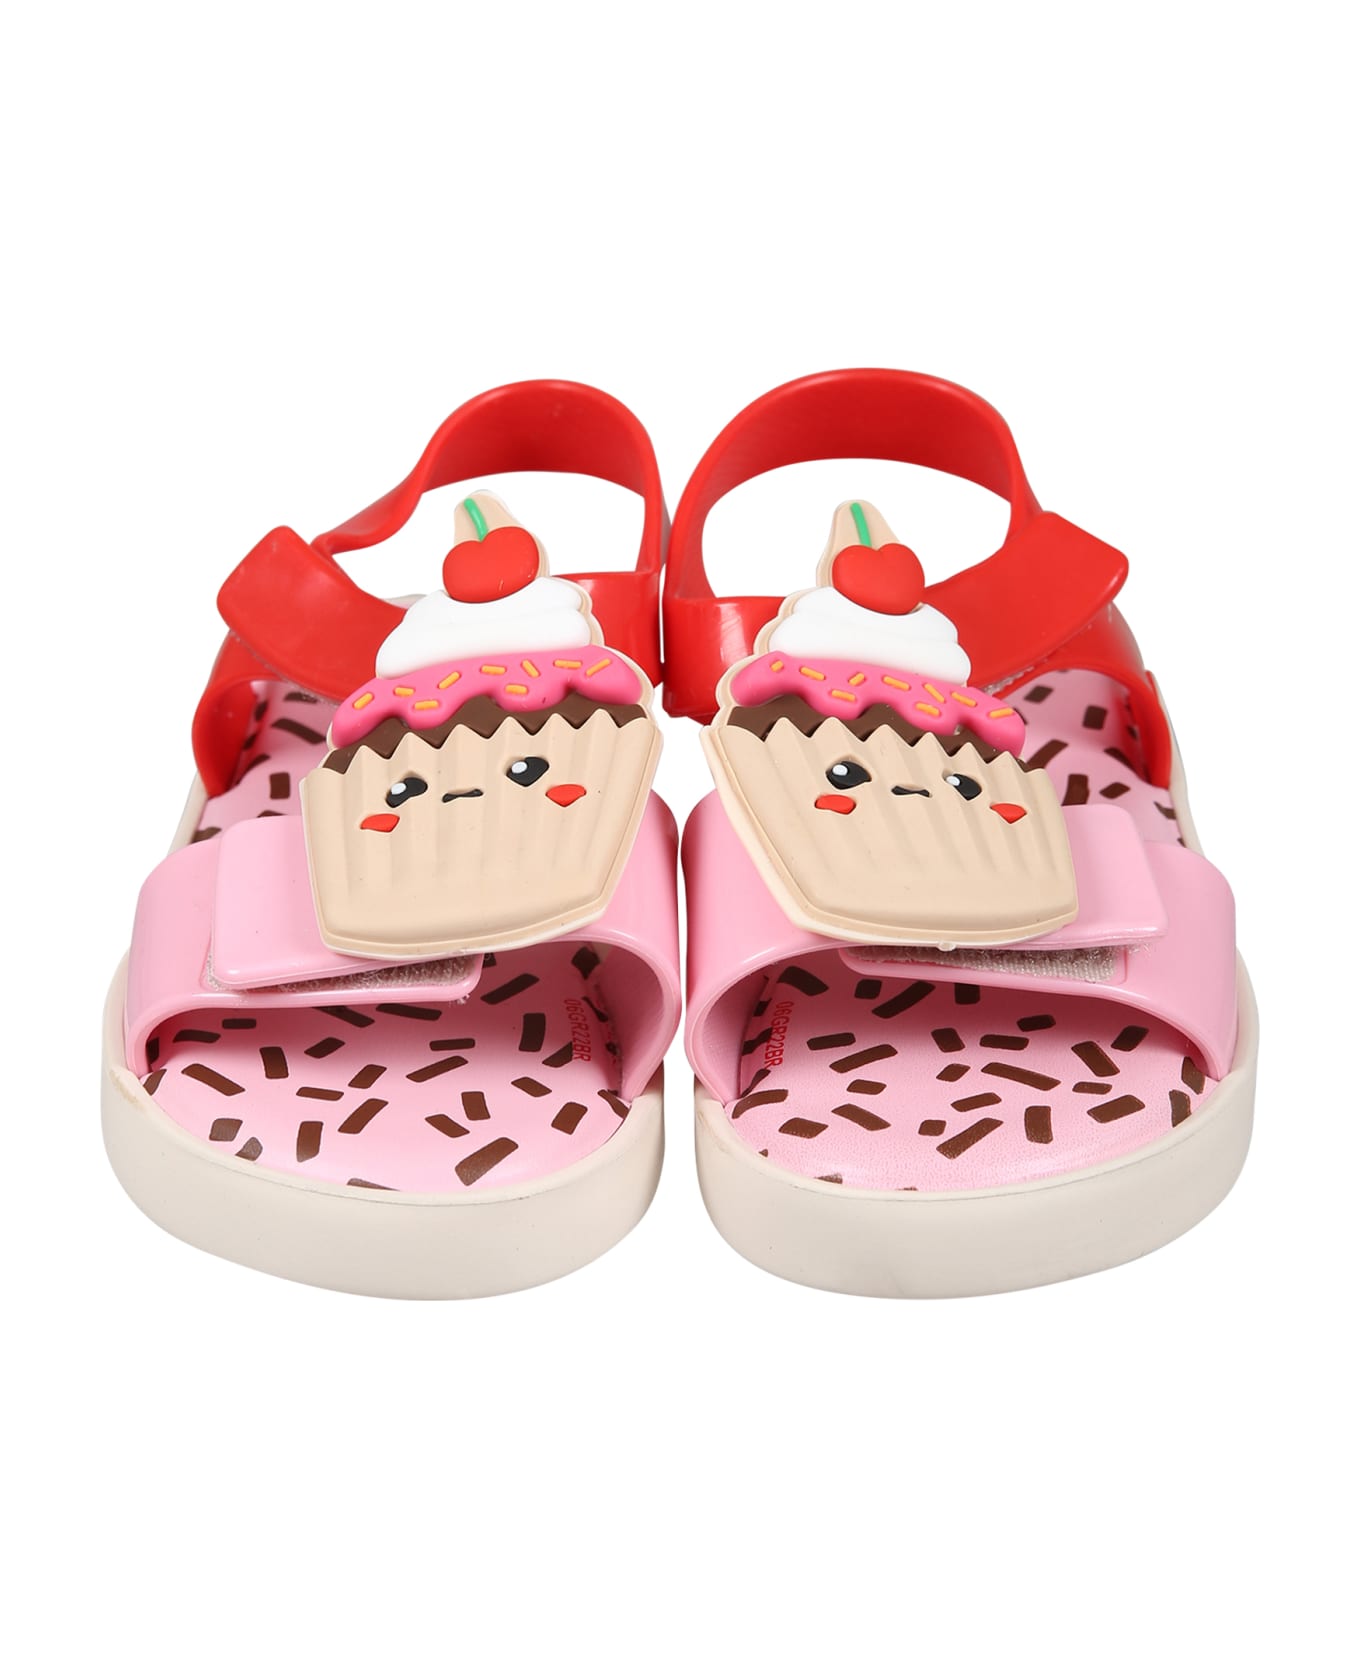 Melissa Multicolor Sandals For Girl With Cupcake And Logo - Multicolor シューズ